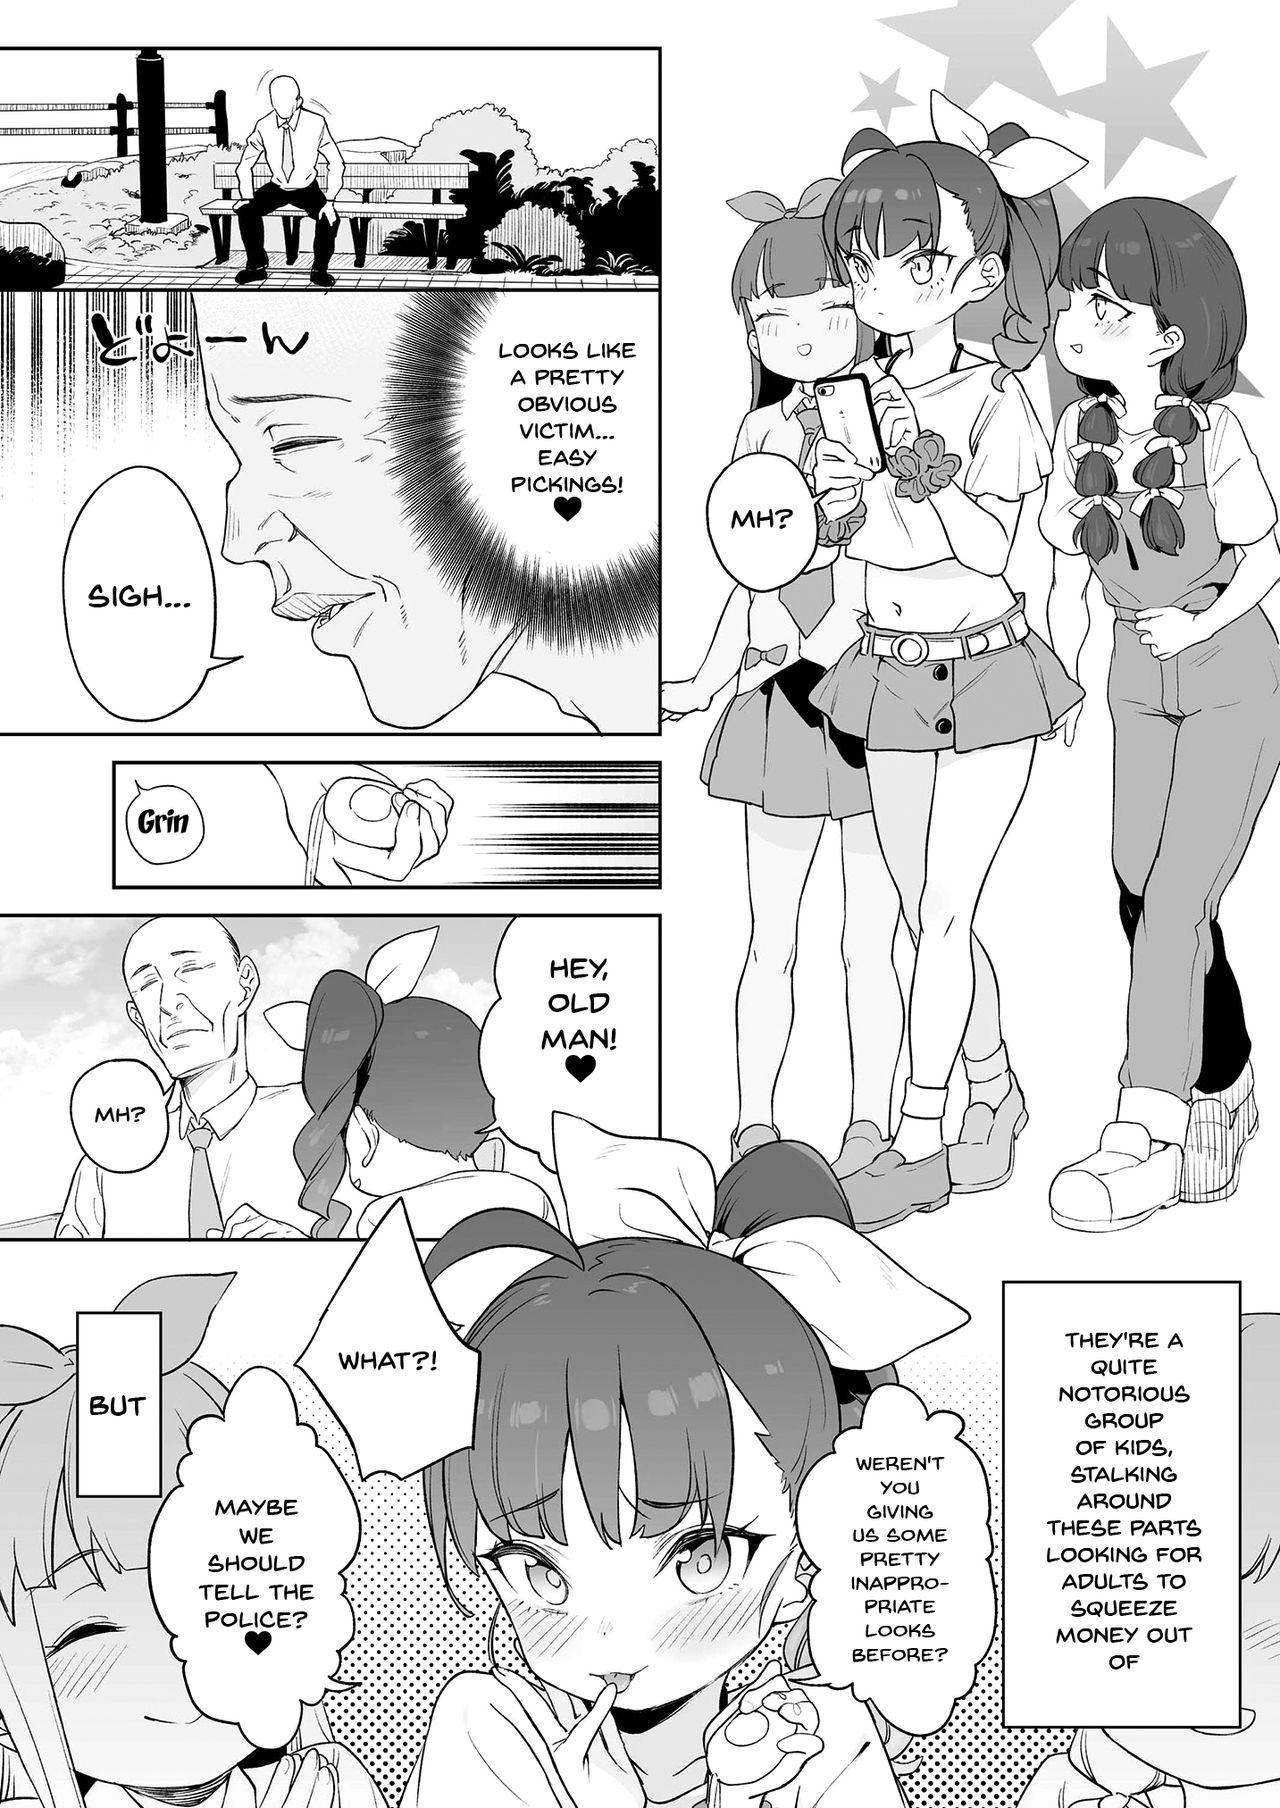 Caught Mesugaki Wakarase Goudou | A Putting Slutty Brats In Their Place Collection - Original Free Blowjobs - Page 12